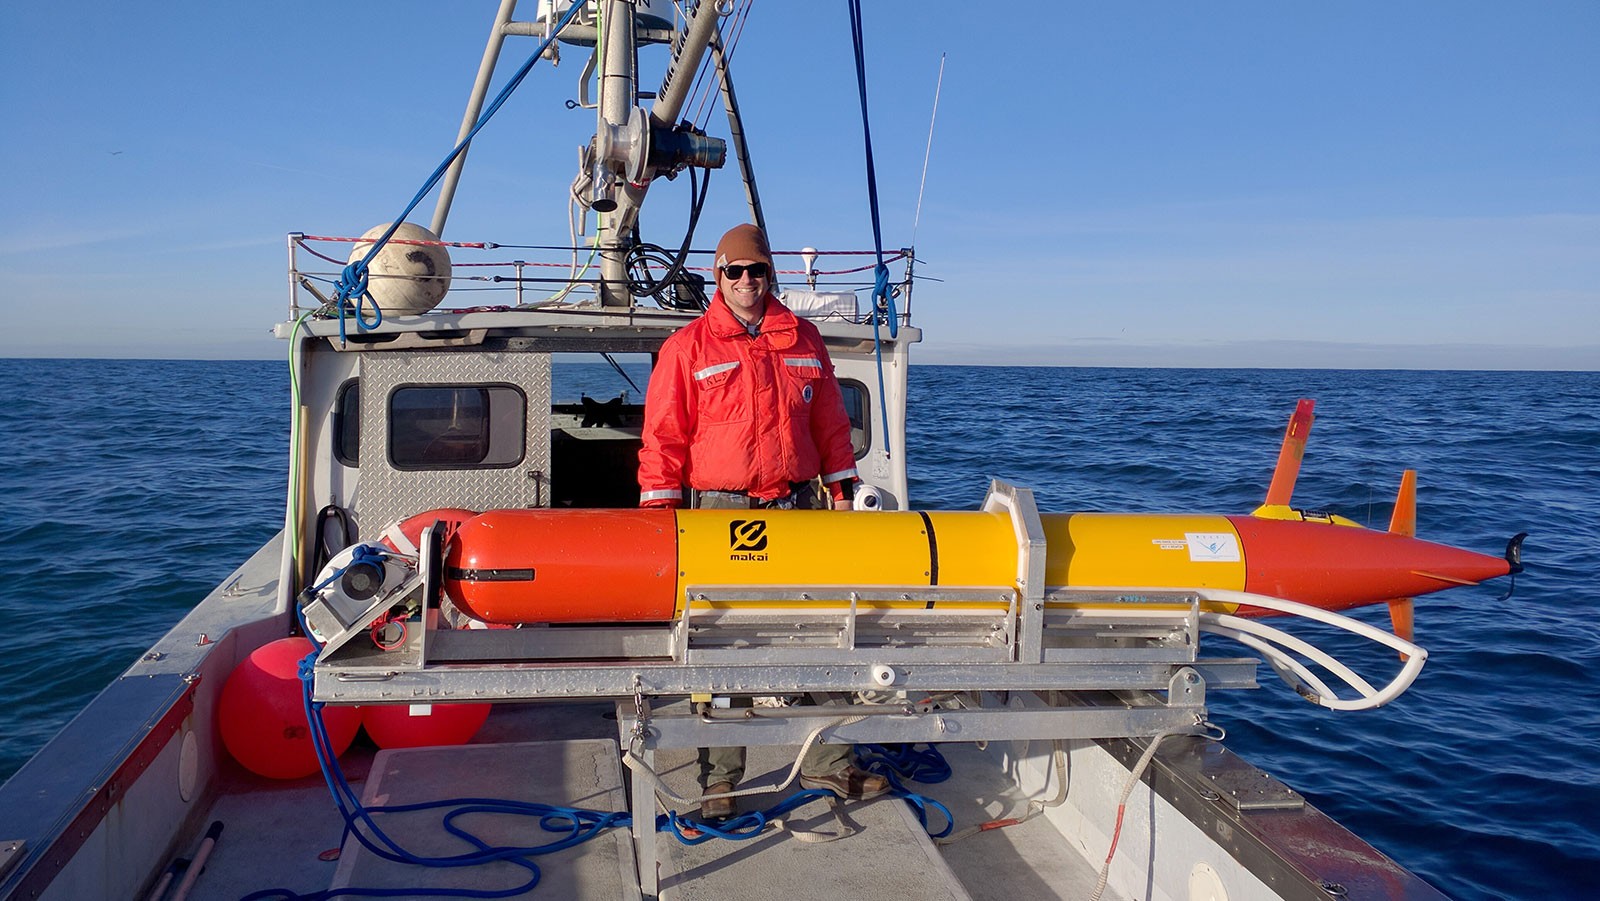 A NOAA Scientist stands next to an eAUV